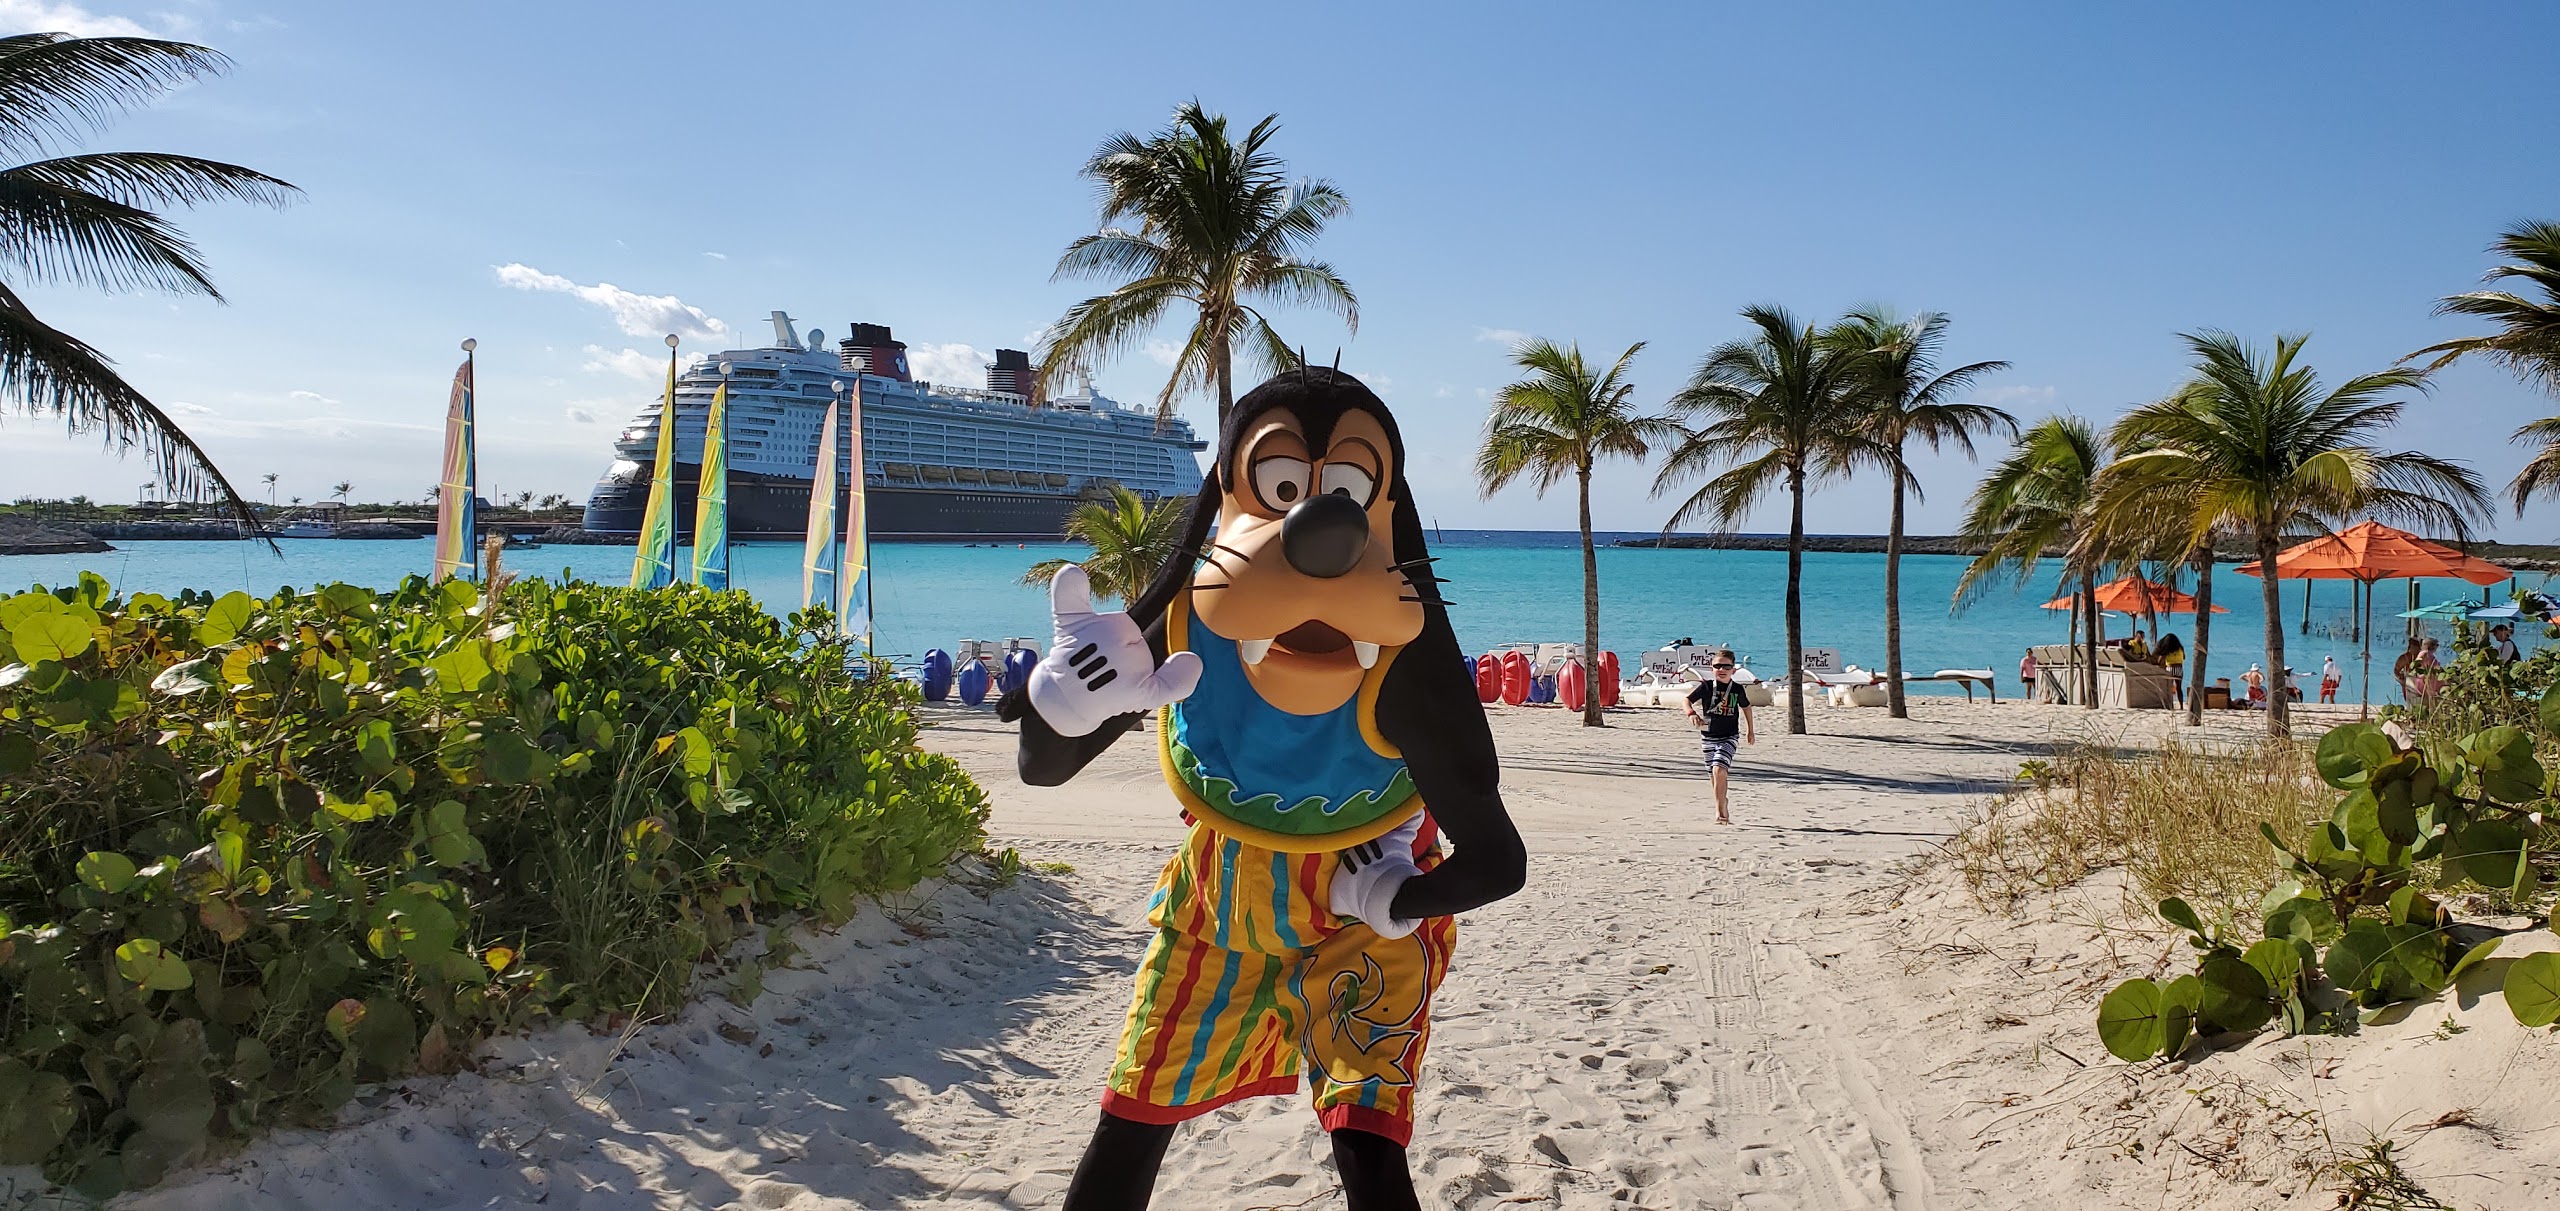 Will Disney Cruise Line require a vaccination to sail?